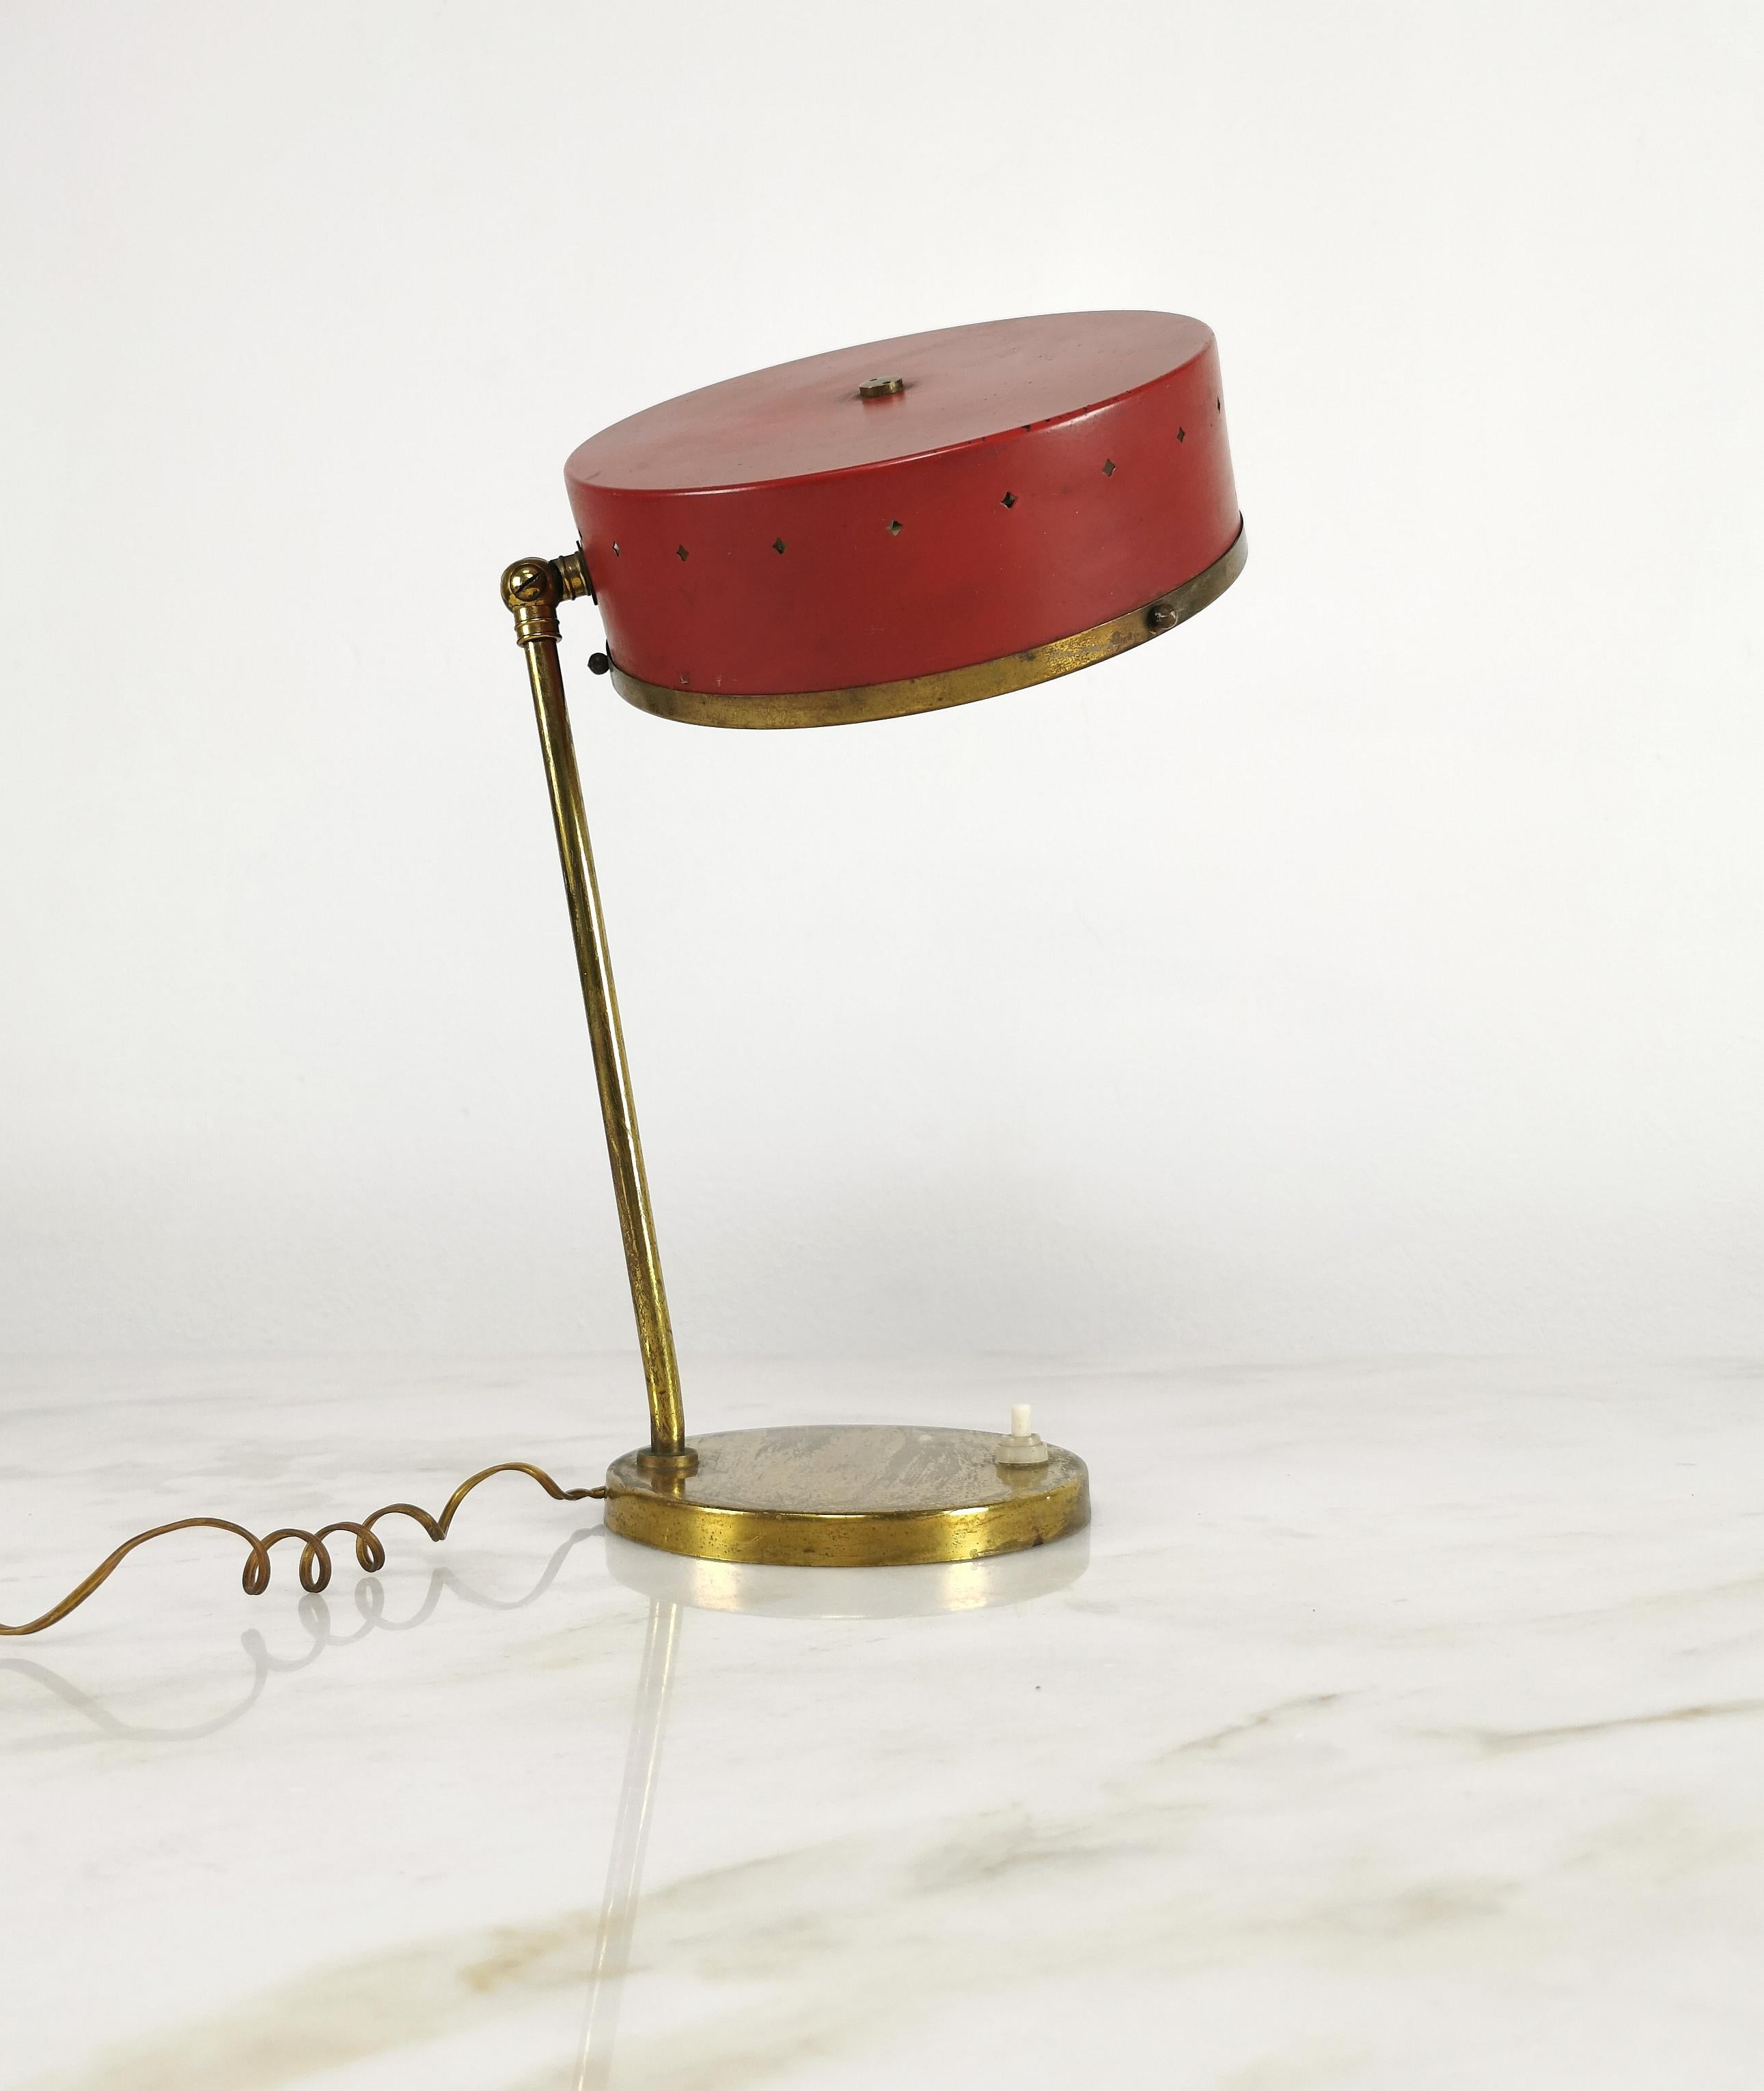 Table lamp with 1 E27 light produced in Italy in the 1950s, attributed to Stilnovo. The lamp was made with a circular brass base where a stem and a brass joint rise, which means that the red enamelled metal diffuser with glass underneath can be